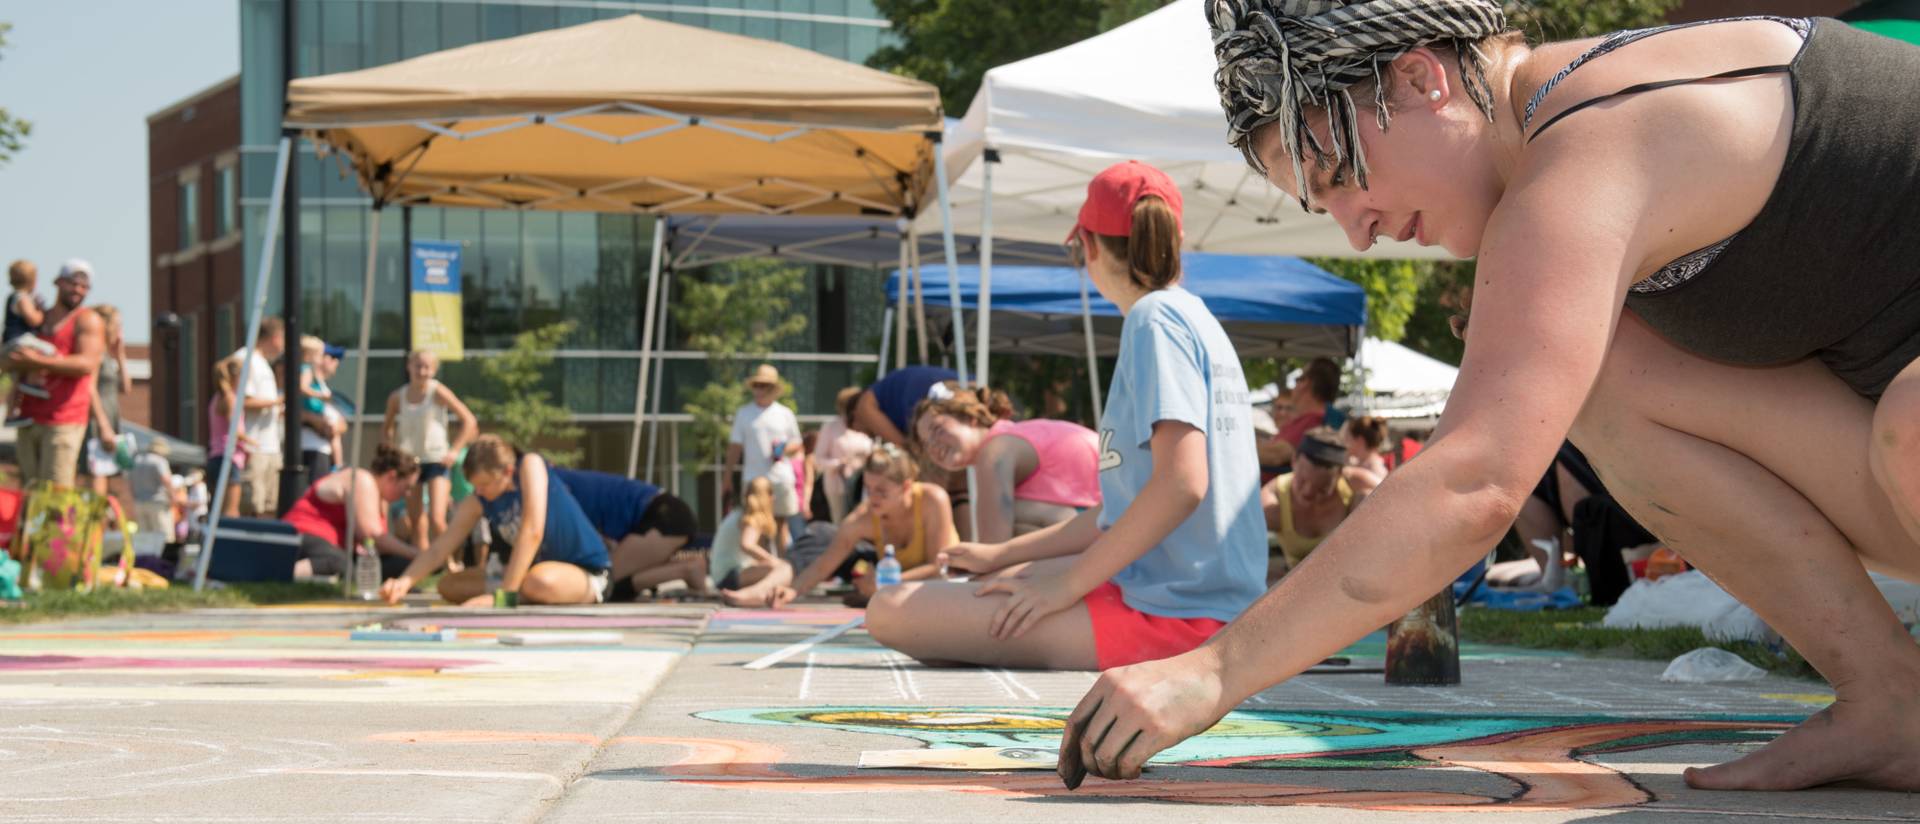 Artists decorate the Campus Mall sidewalk during Chalkfest 2015.